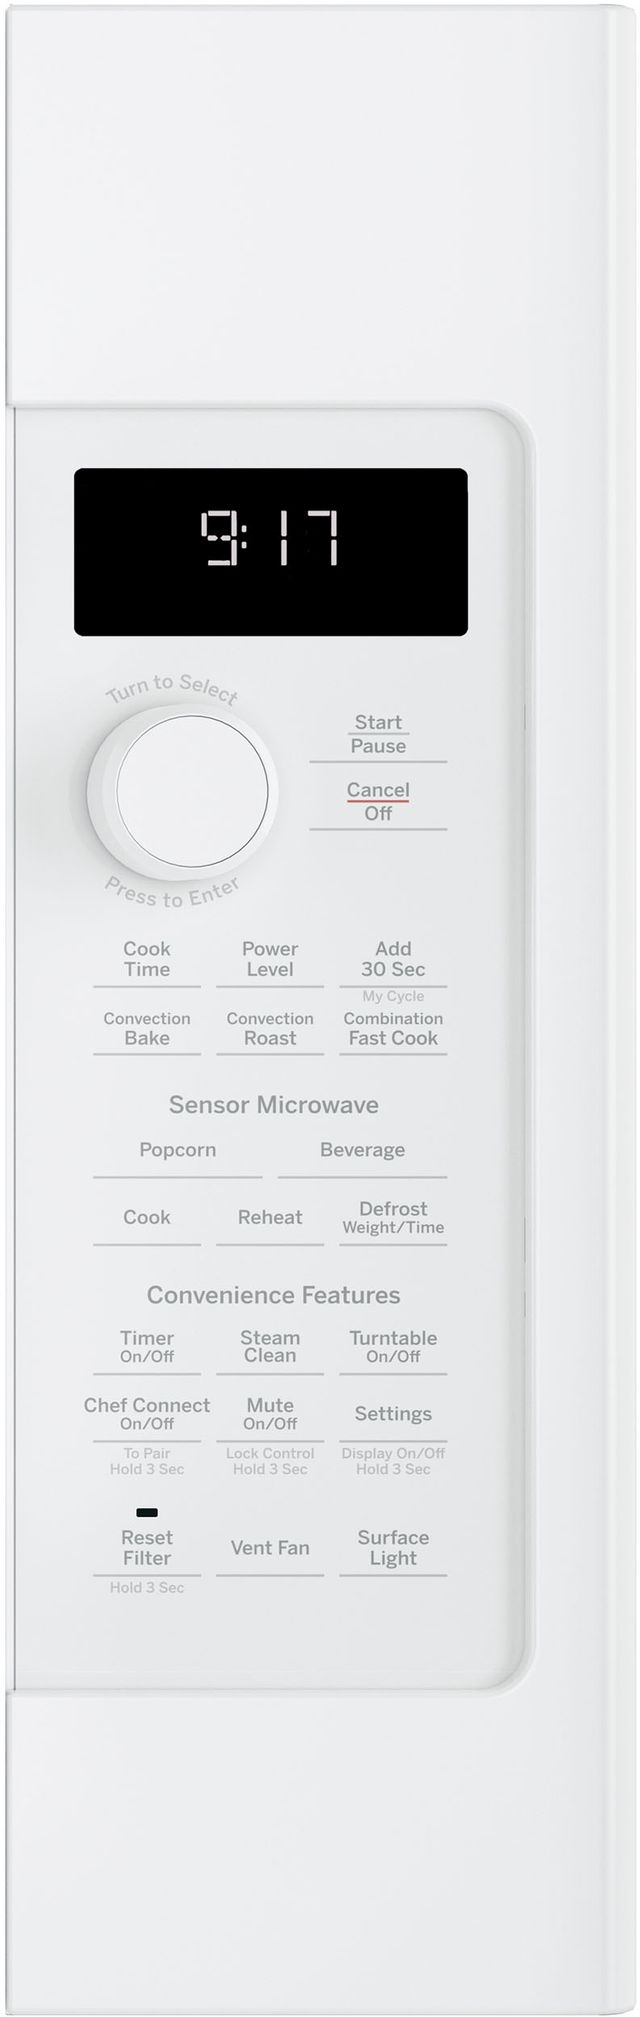 GE Profile™ 1.7 Cu. Ft. Stainless Steel Over The Range Microwave 8